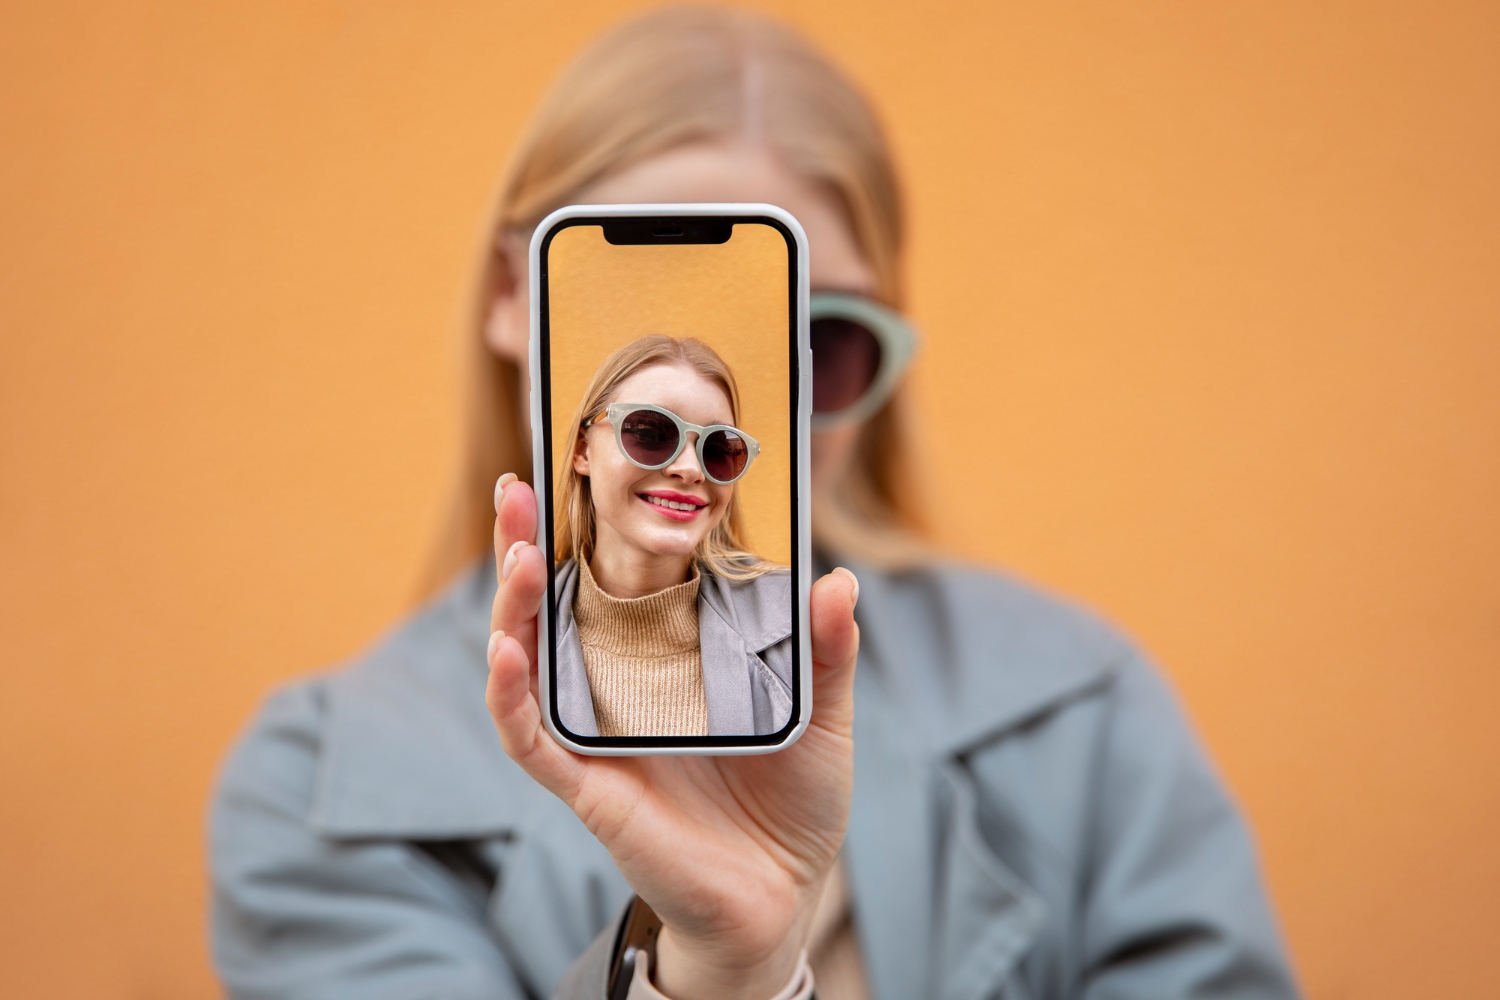 Woman holding a smartphone to take a selfie picture